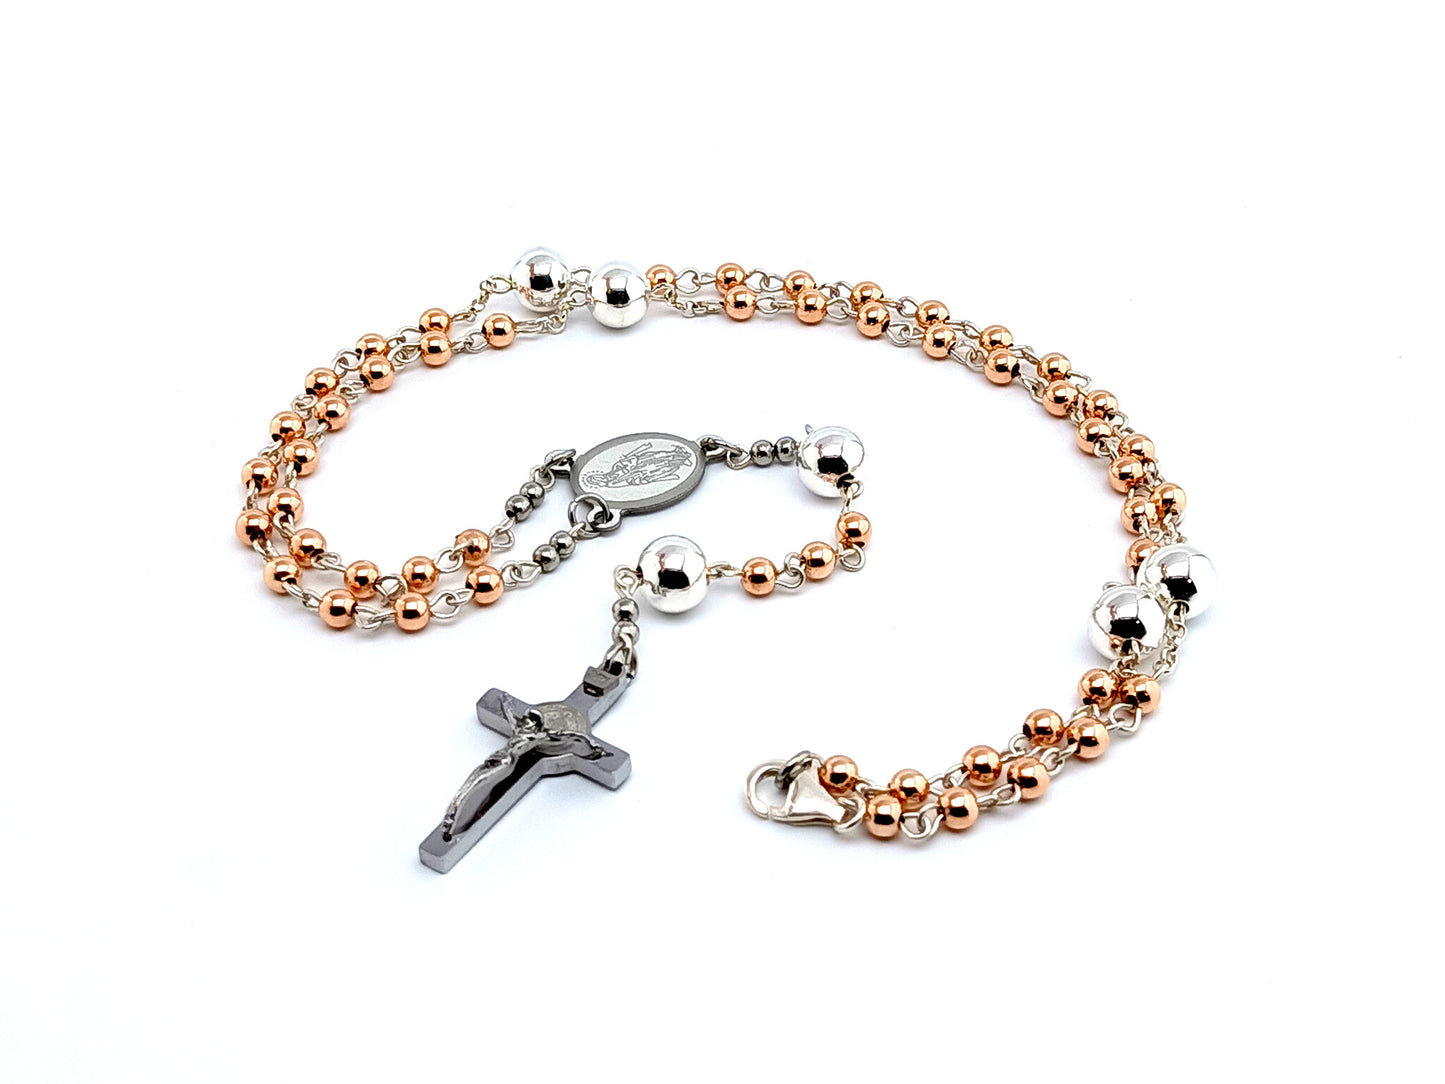 Miraculous medal unique rosary beads rose gold hematite and sterling silver gemstone rosary beads necklace and Saint Benedict stainless steel crucifix.